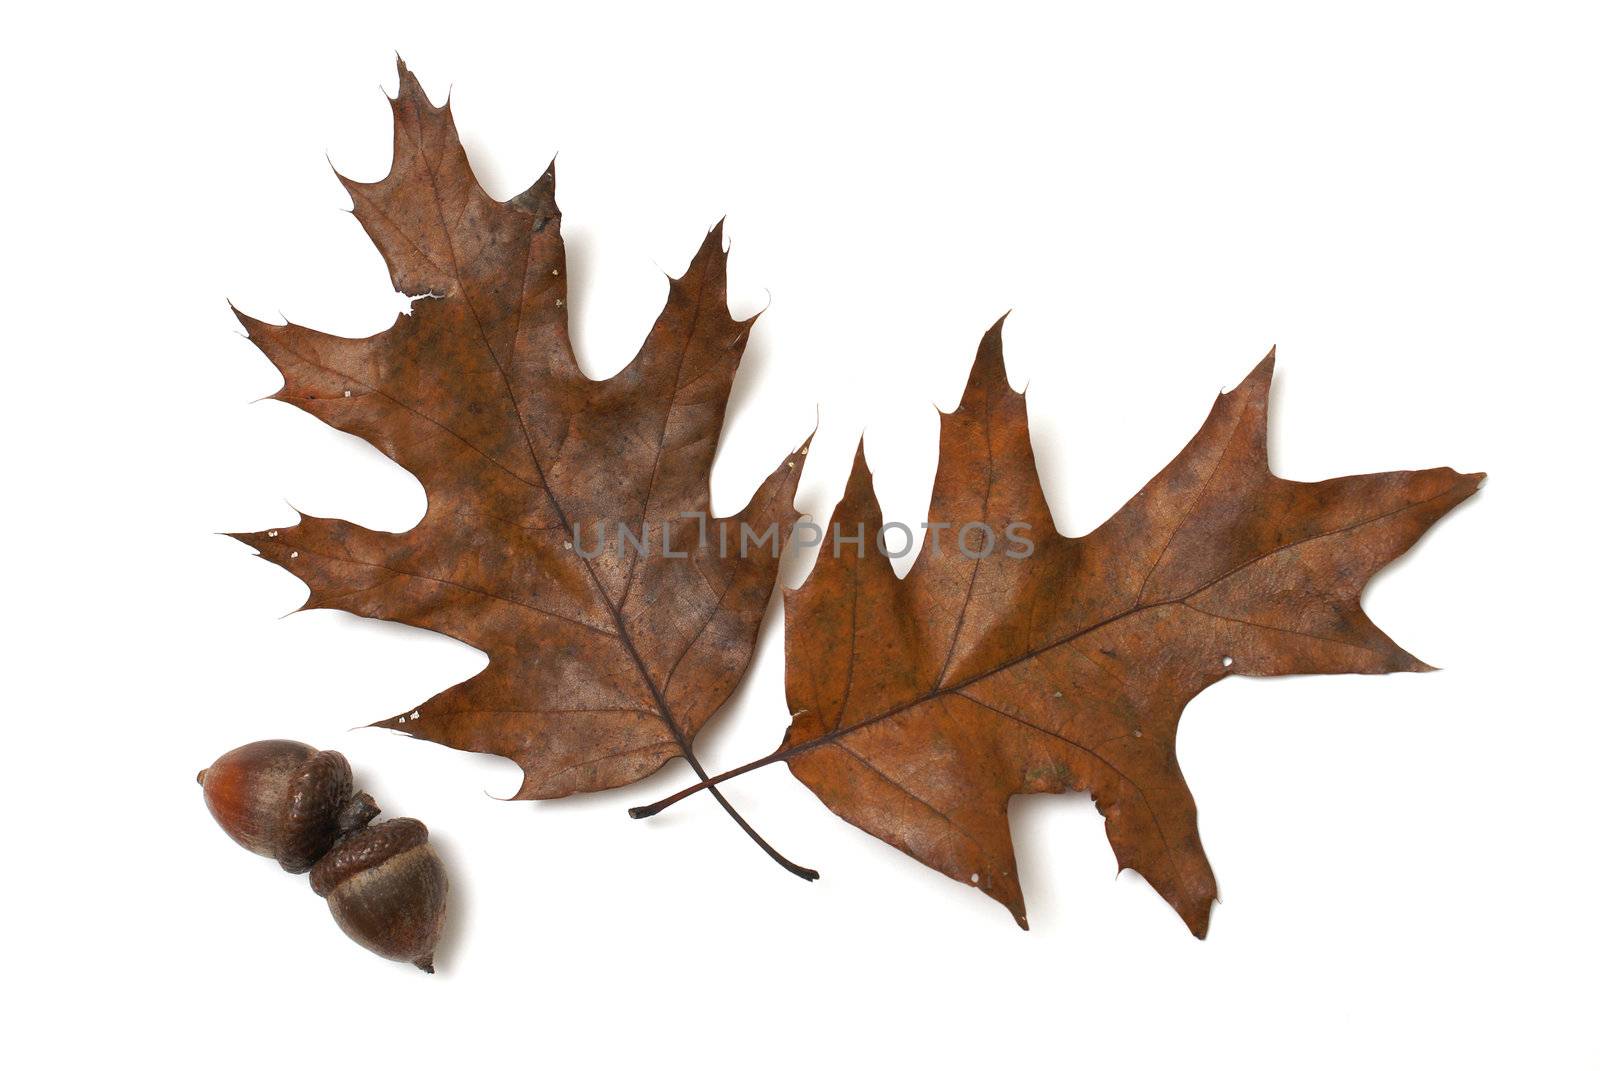 Two oak leaves and two oak acorns isolated on white.